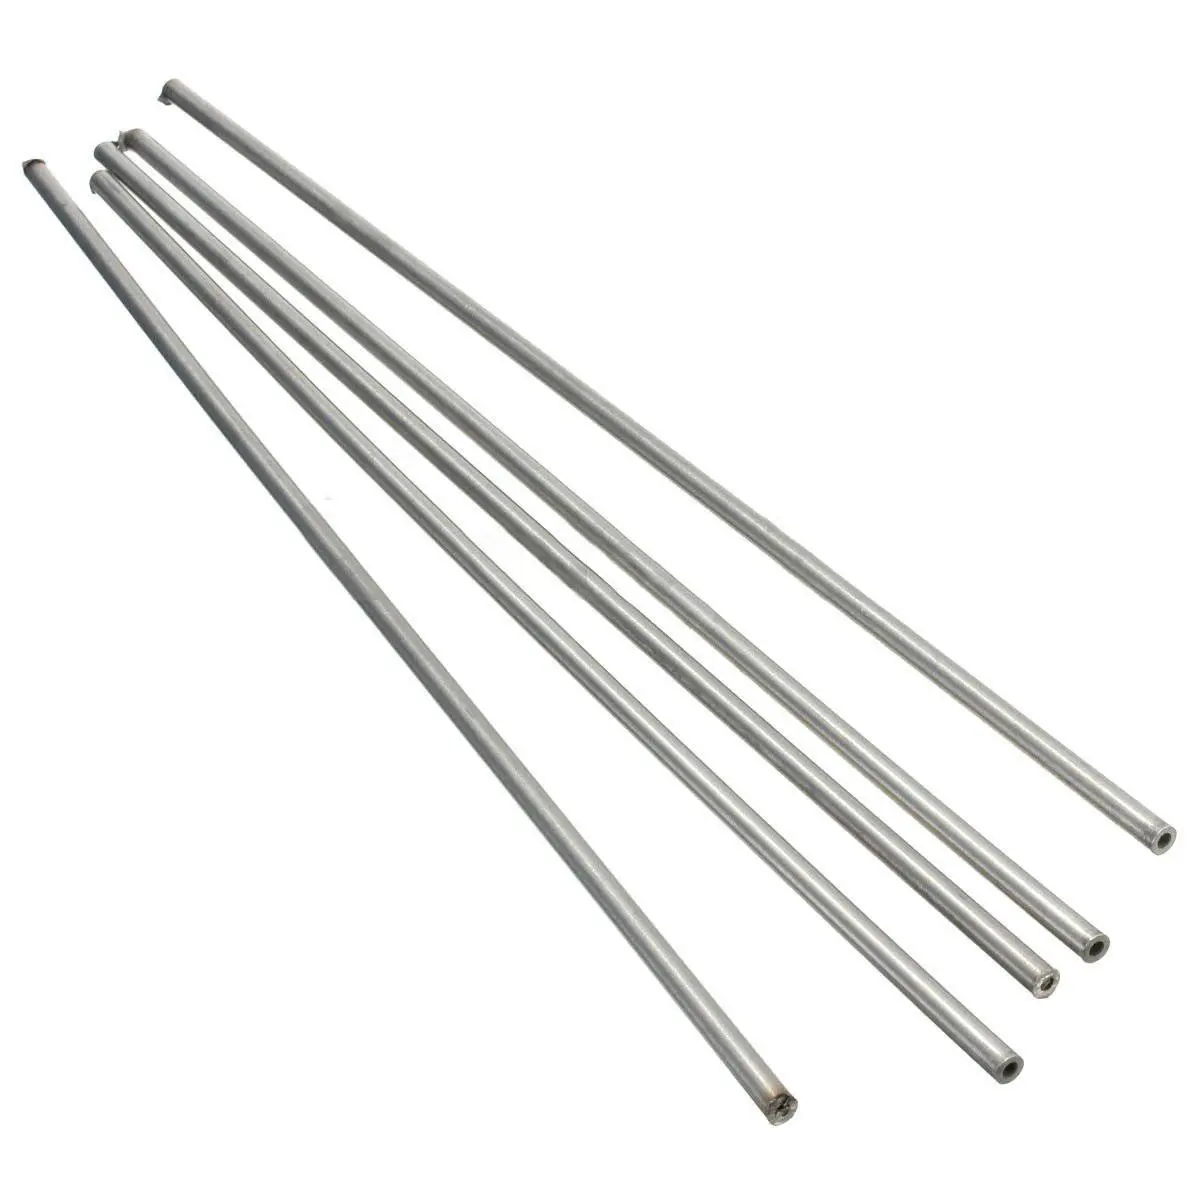 2pcs 304 Stainless Seamless Steel Capillary Tube 5mm OD 3mm ID 250mm Length For Aviation Antenna